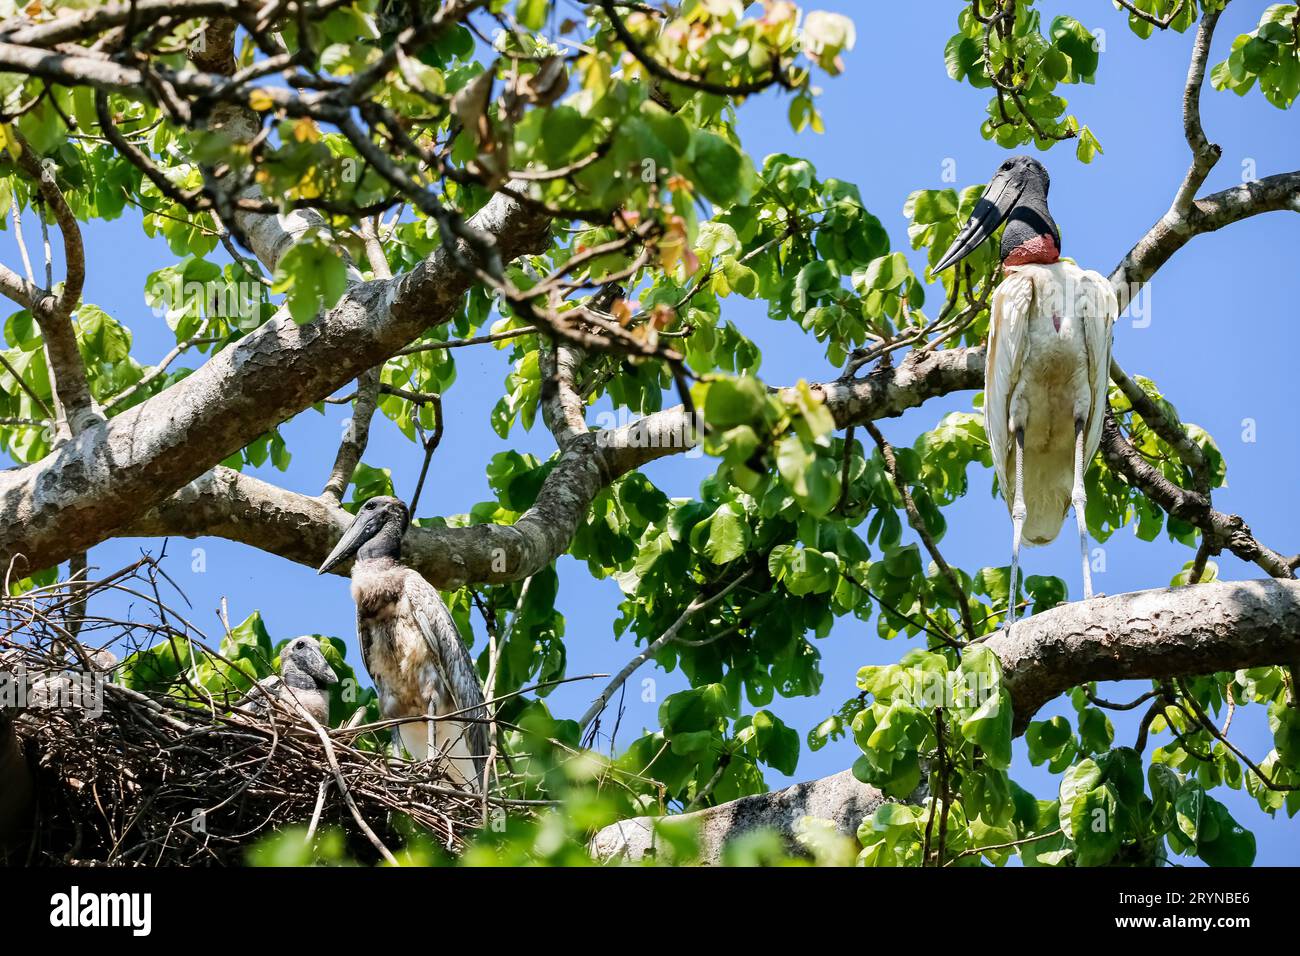 Jabiru stork watching his youngster in the nest in a tree, Pantanal Wetlands, Mato Grosso, Brazil Stock Photo